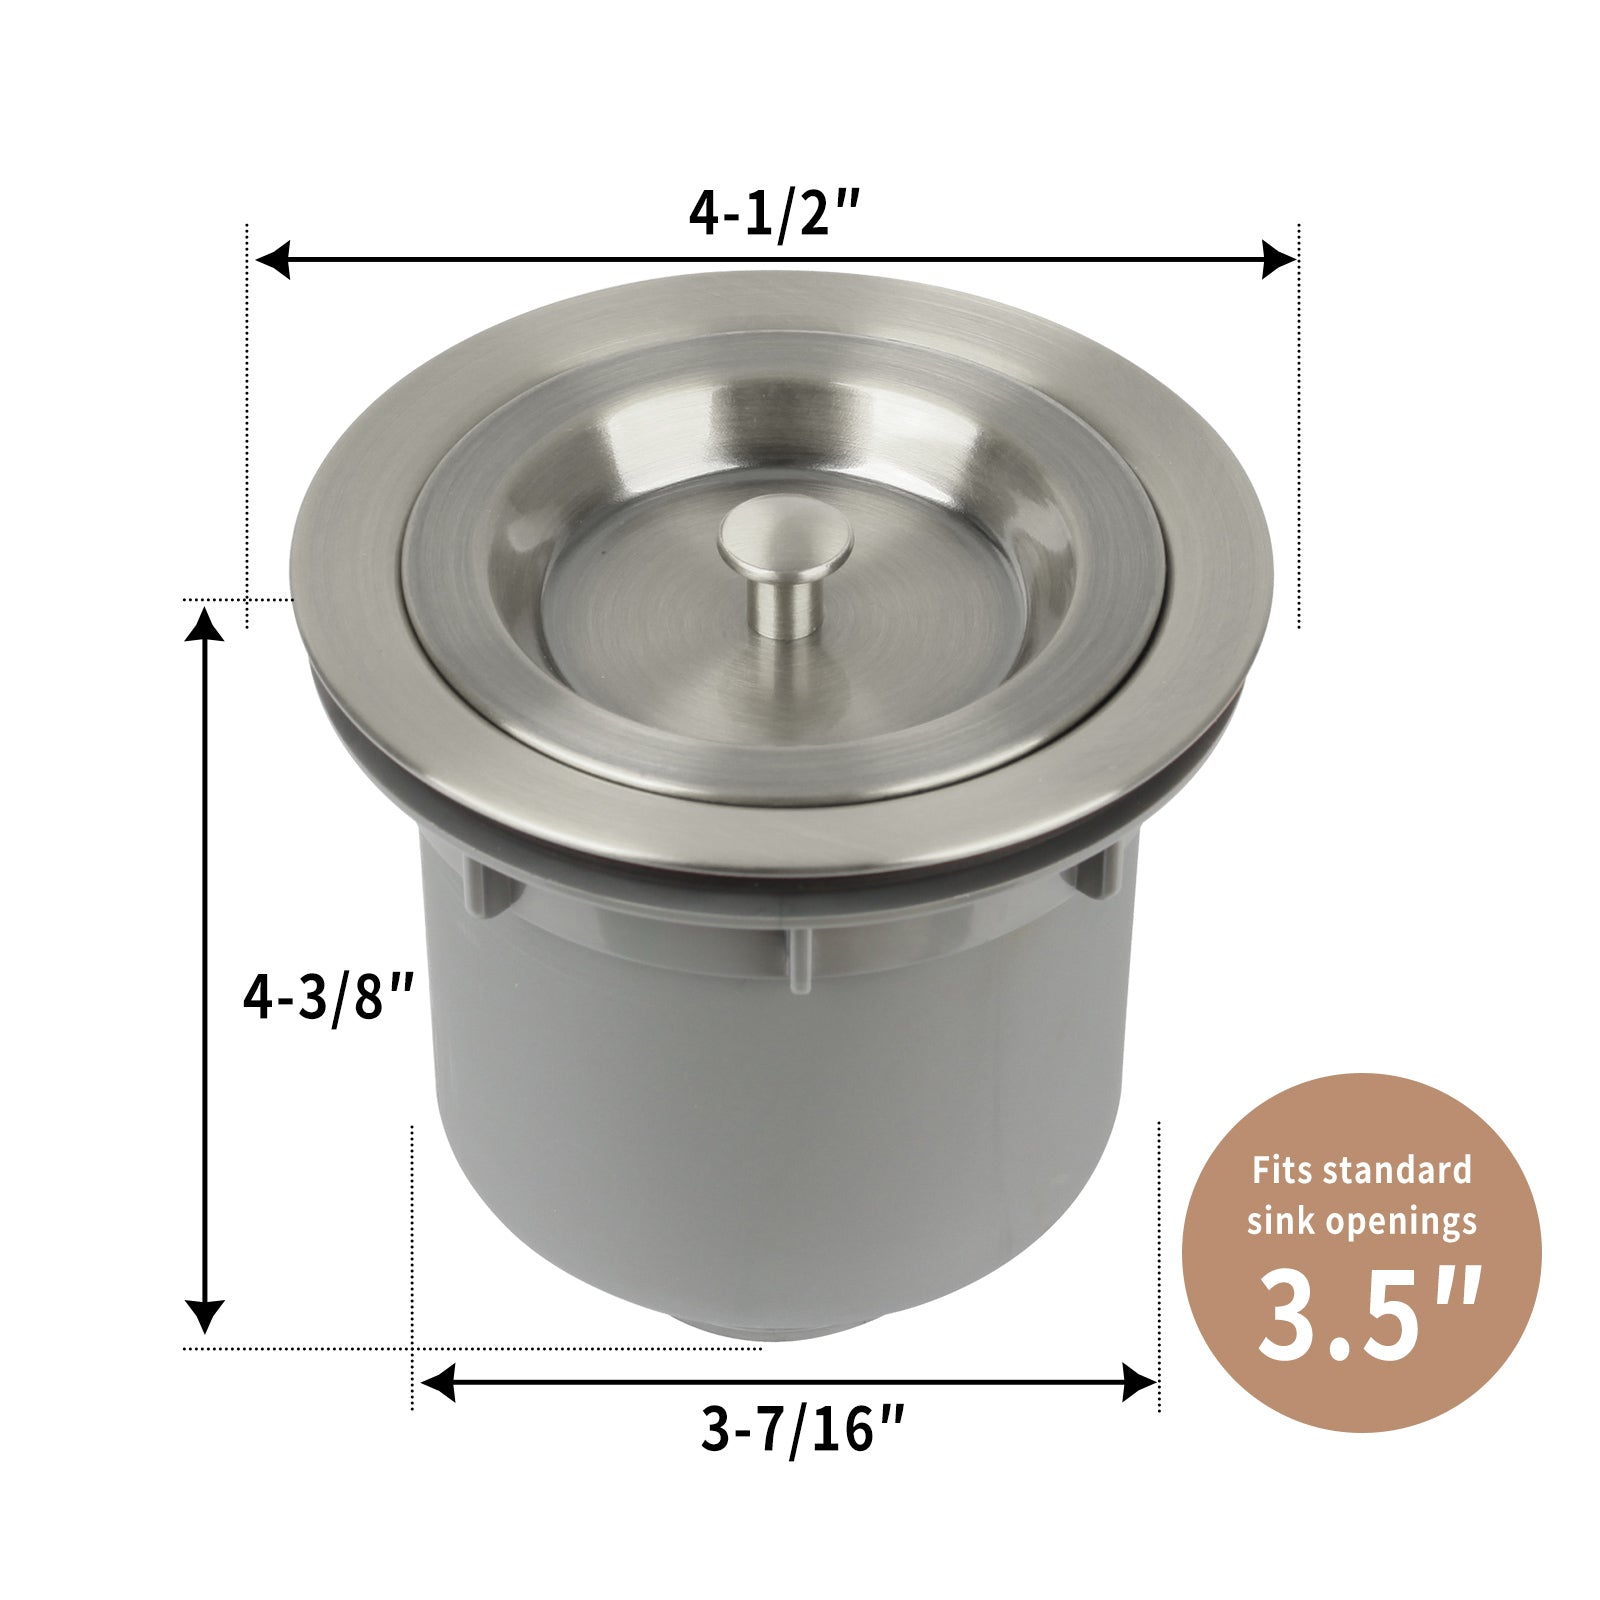 Brushed Nickel Kitchen Sink Stopper Replacement for 3-1/2 Inch Standard Strainer Drain - AK82103BN